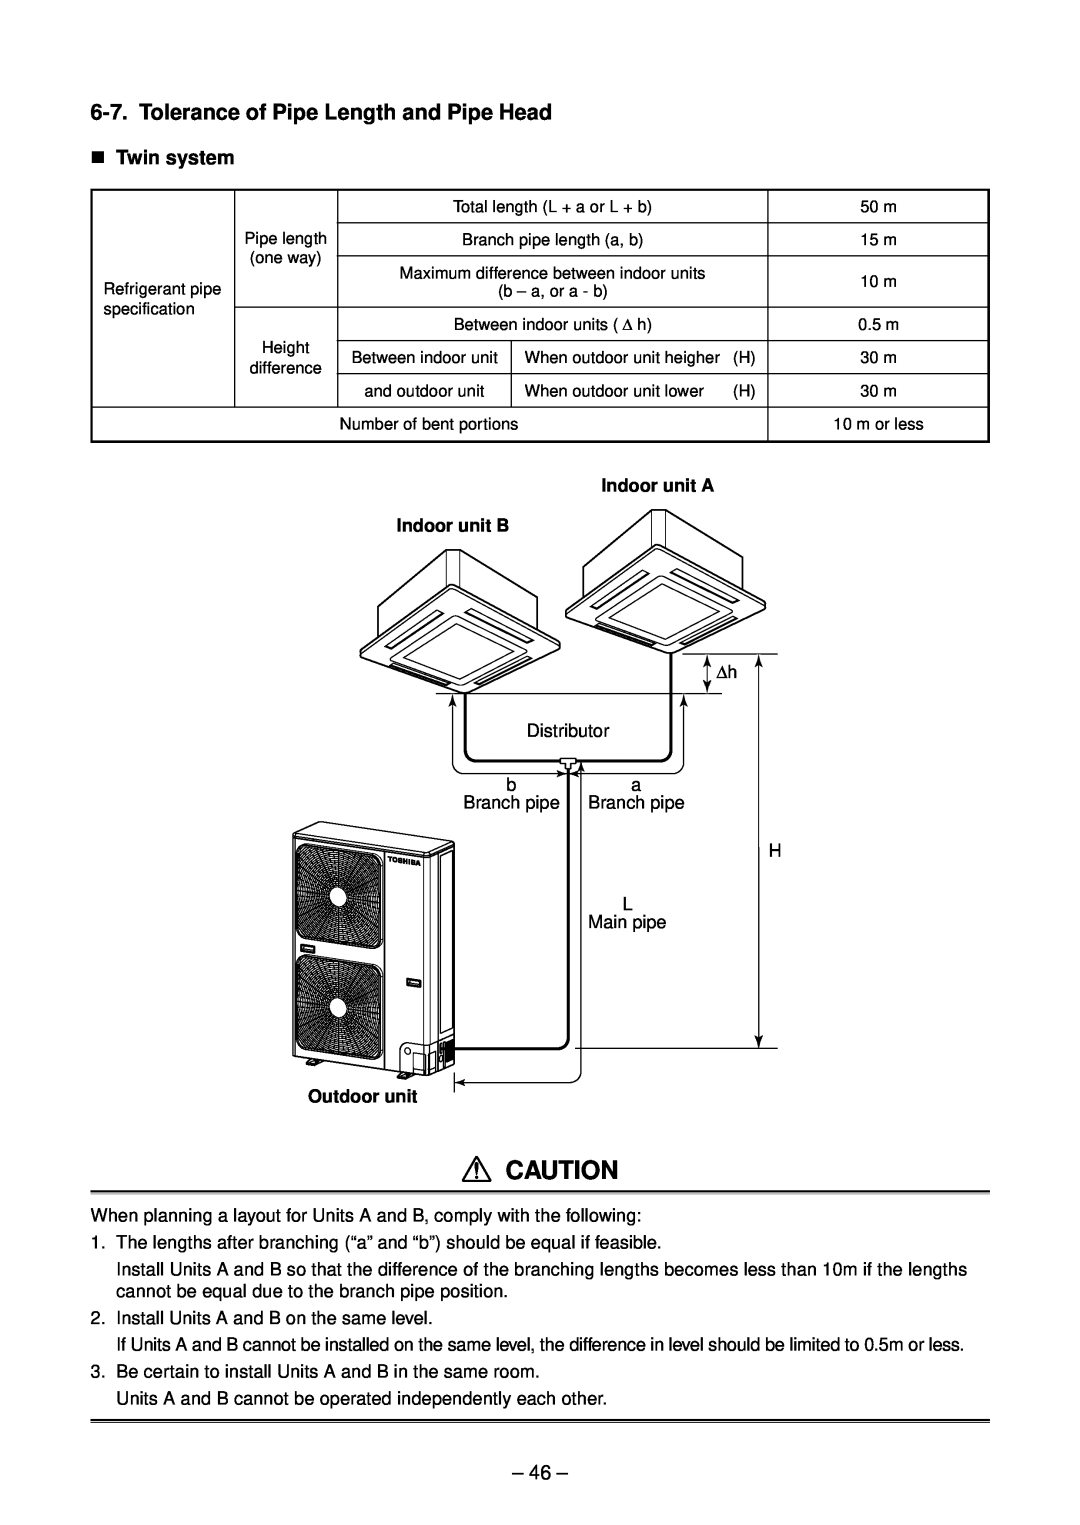 Toshiba RAV-SM1603ATZ-E Tolerance of Pipe Length and Pipe Head, n Twin system, Indoor unit A Indoor unit B, Outdoor unit 